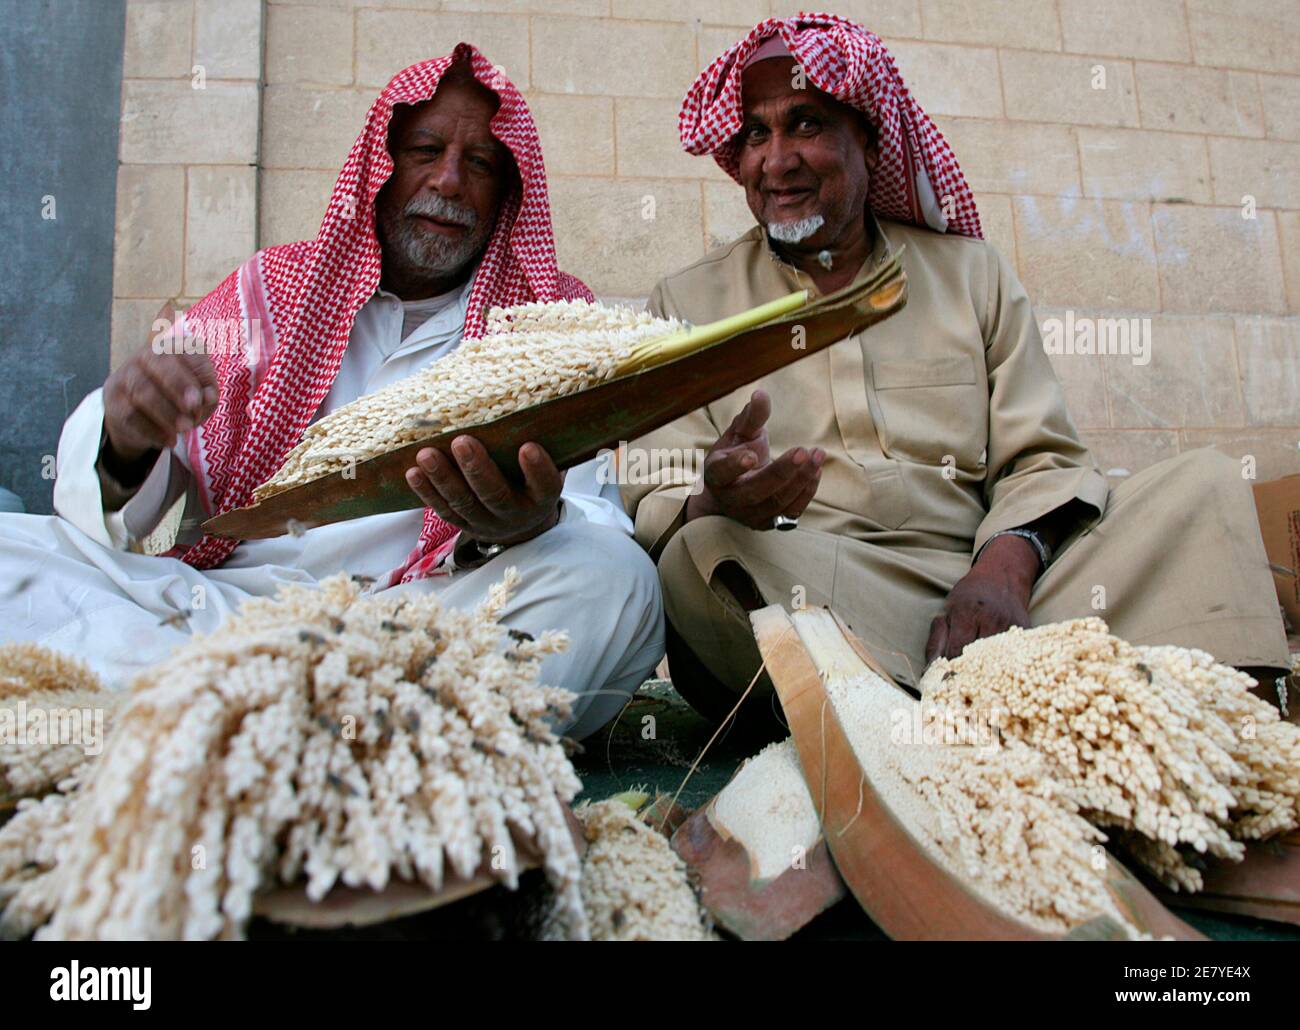 Street vendors sell palm tree pollen in Riyadh March 3, 2008. The pollen is used in the preparation of a local aphrodisiac, which is popular among men. REUTERS/Fahad Shadeed   (SAUDI ARABIA) Stock Photo